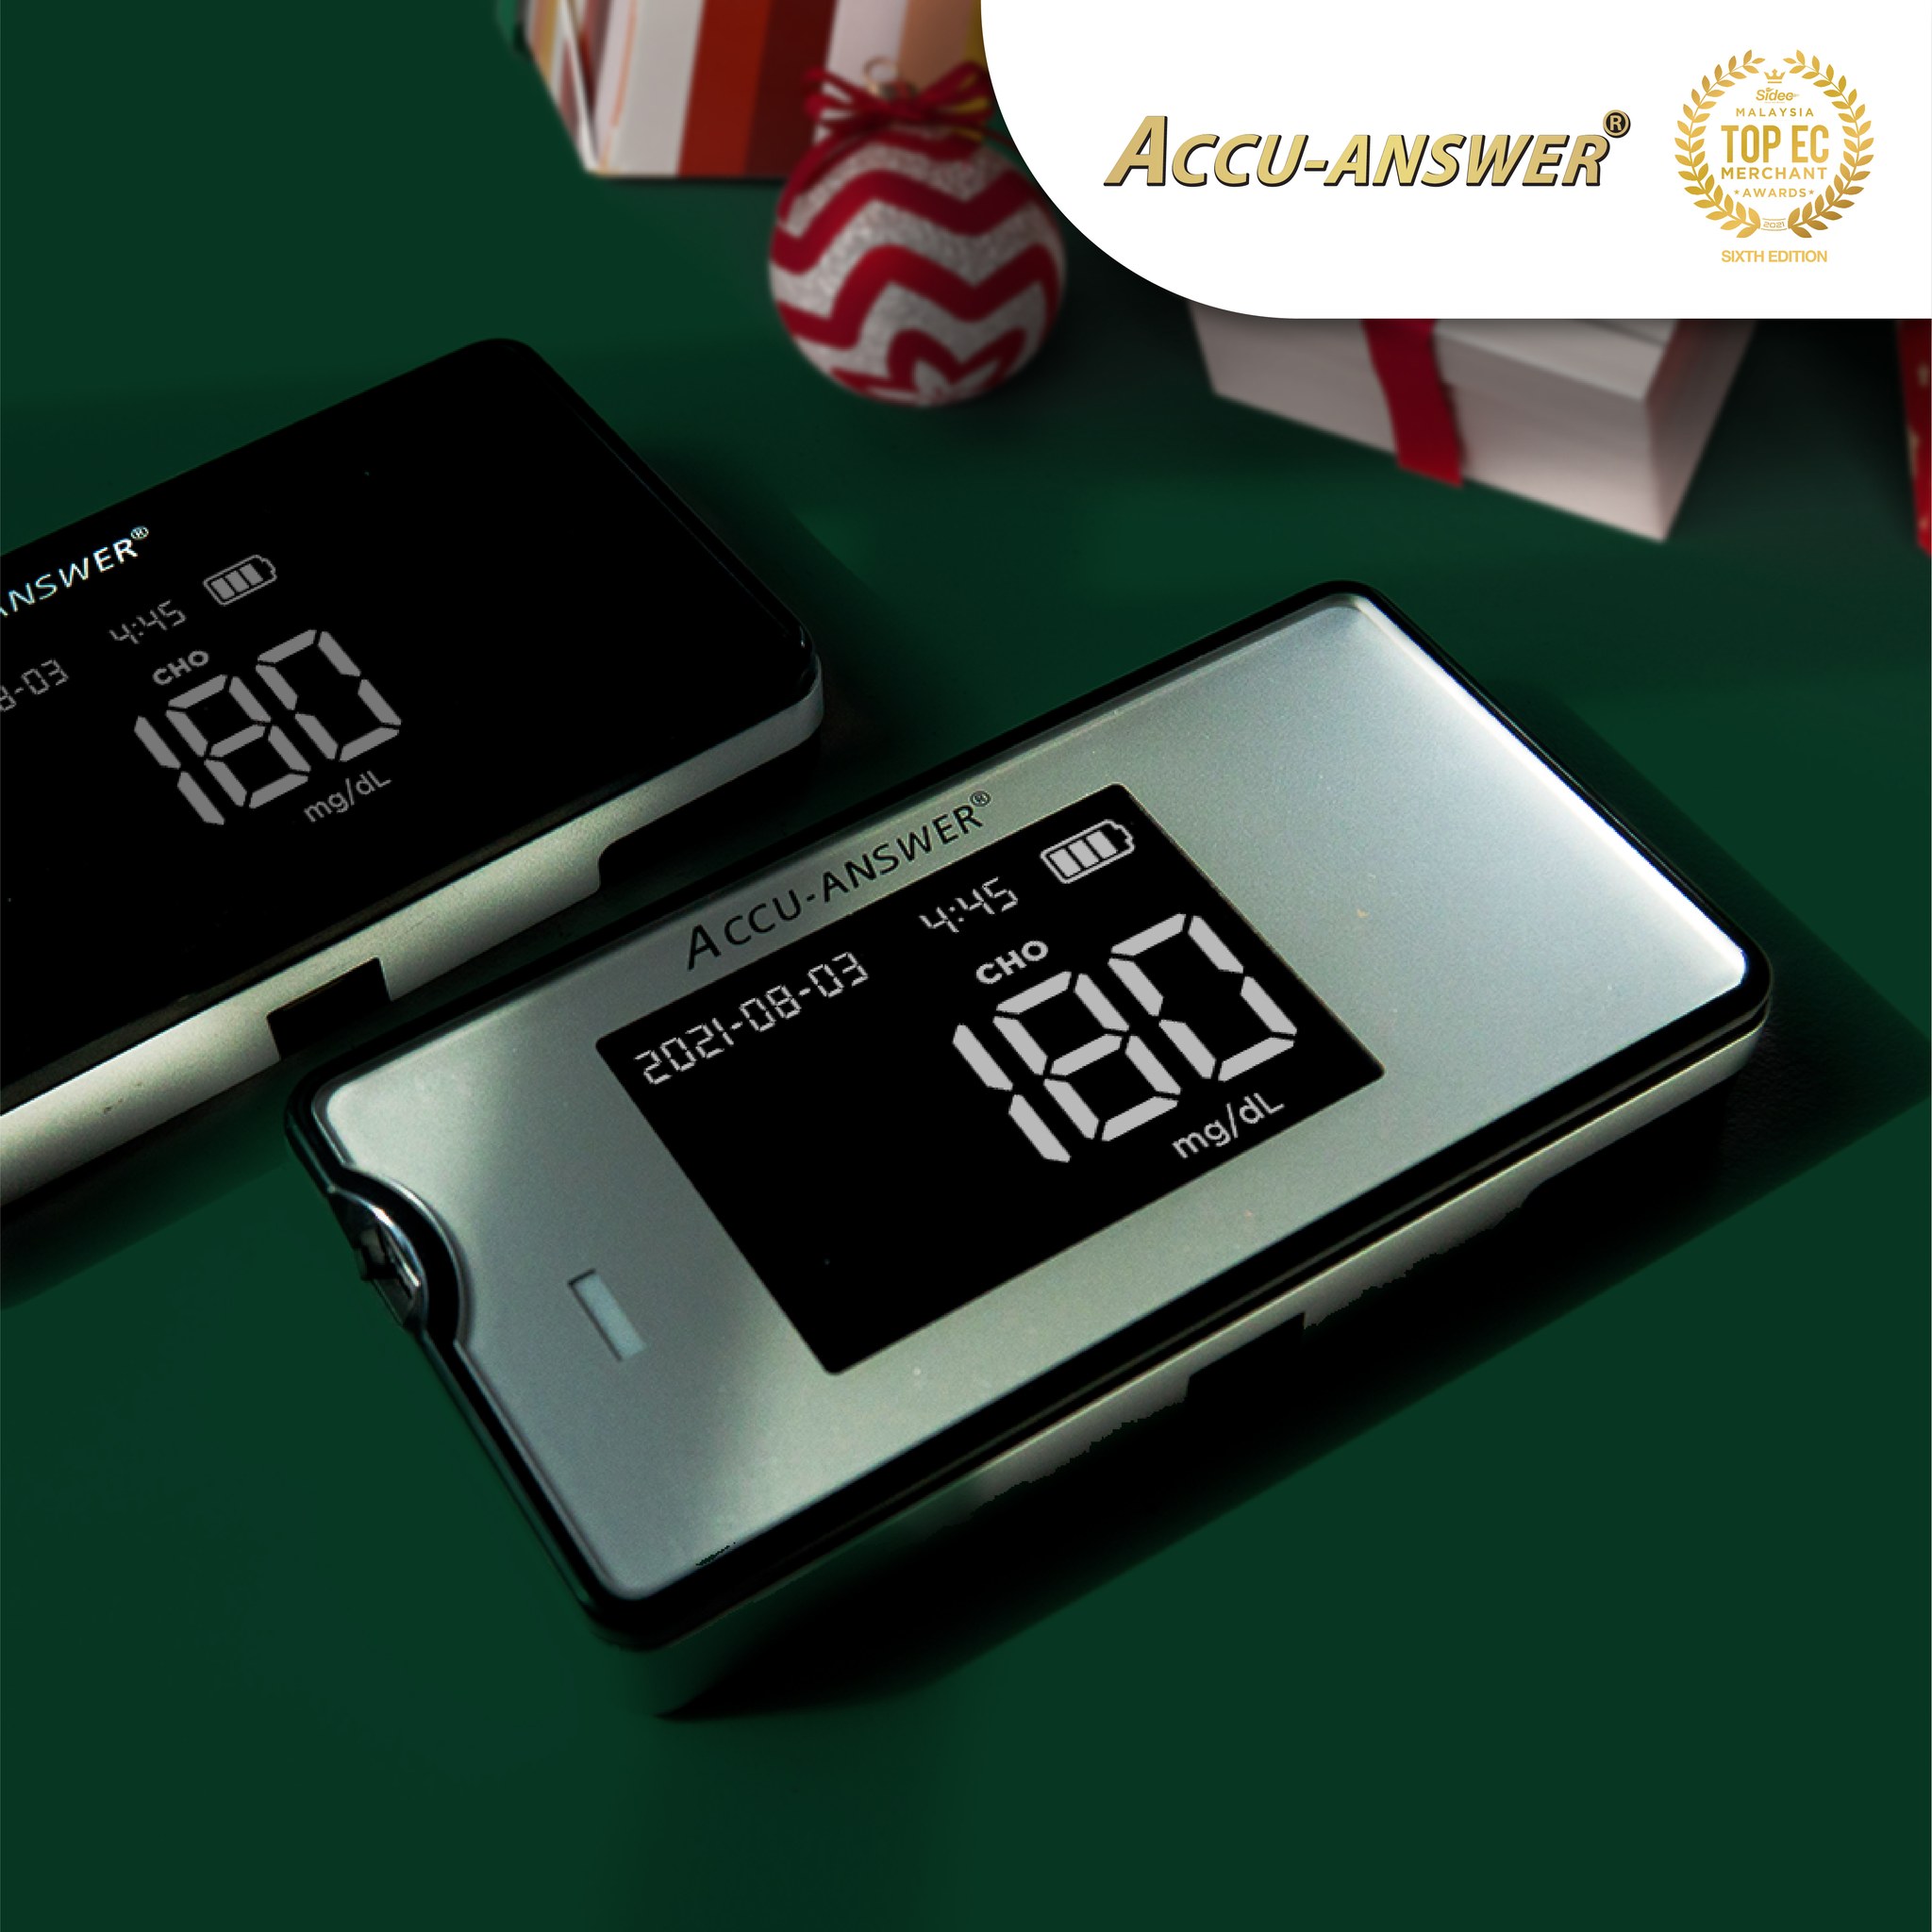 Get Your Accu-Answer® isaw® 4 in 1 Multifunctional Blood Glucose Meter Now !